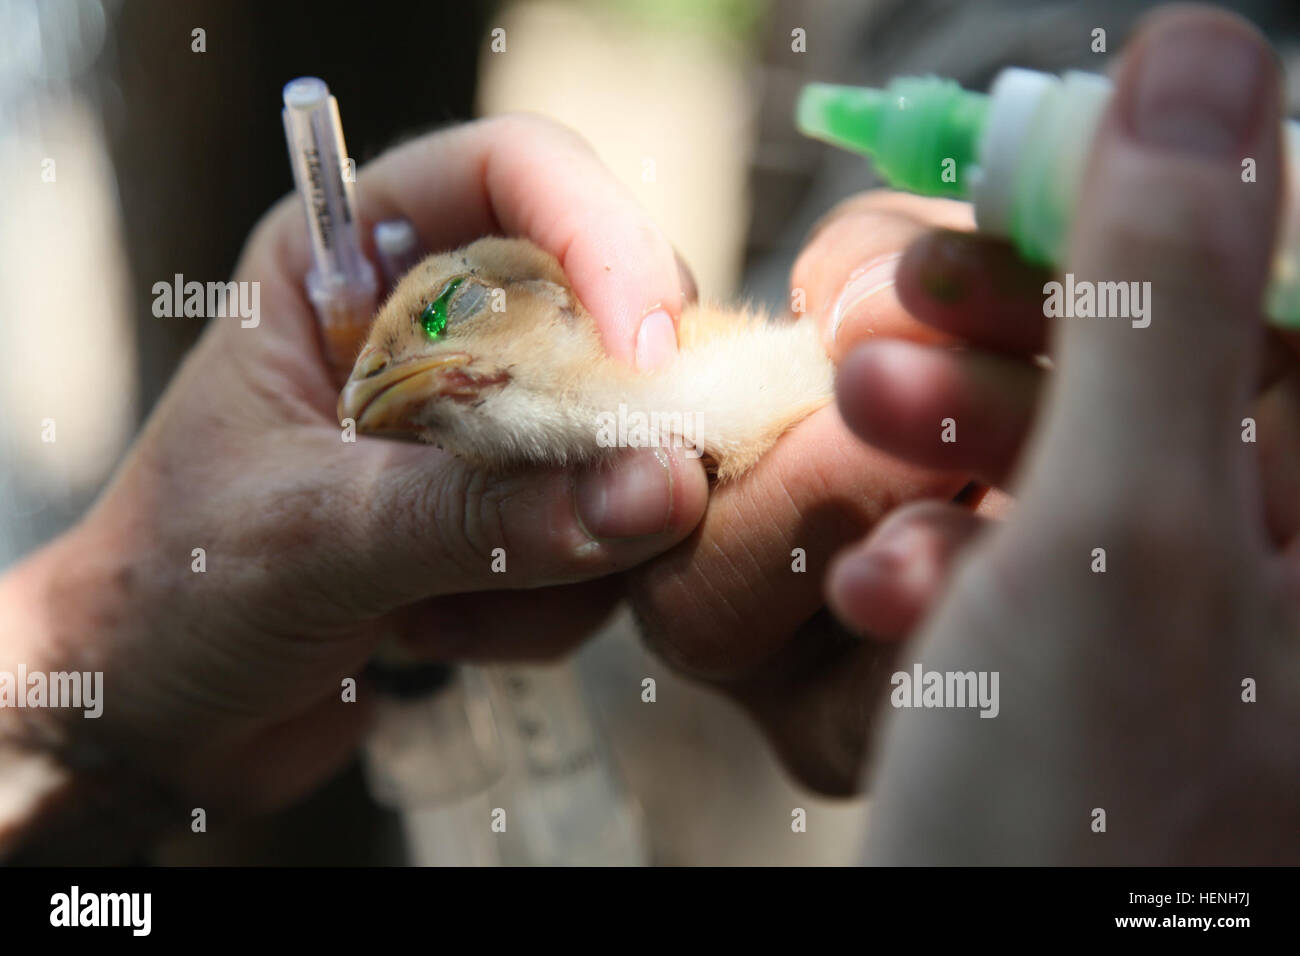 U.S. Army Maj. Victoria Smith, of the 149th Medical Detachment Veterinary Services, vaccinates a chick for a Veterinary Readiness Training Exercise during Beyond the Horizon, San Jose, Guatemala, May 25, 2015. Beyond the Horizon is an annual exercise that embraces the partnership between the United States and Guatemala, to provide focused humanitarian assistance through various medical, dental, and civic action programs. (U.S. Army photo by Pfc. Christopher Martin/Released) Beyond the Horizon 2014, Guatemala 140525-A-GA303-113 Stock Photo